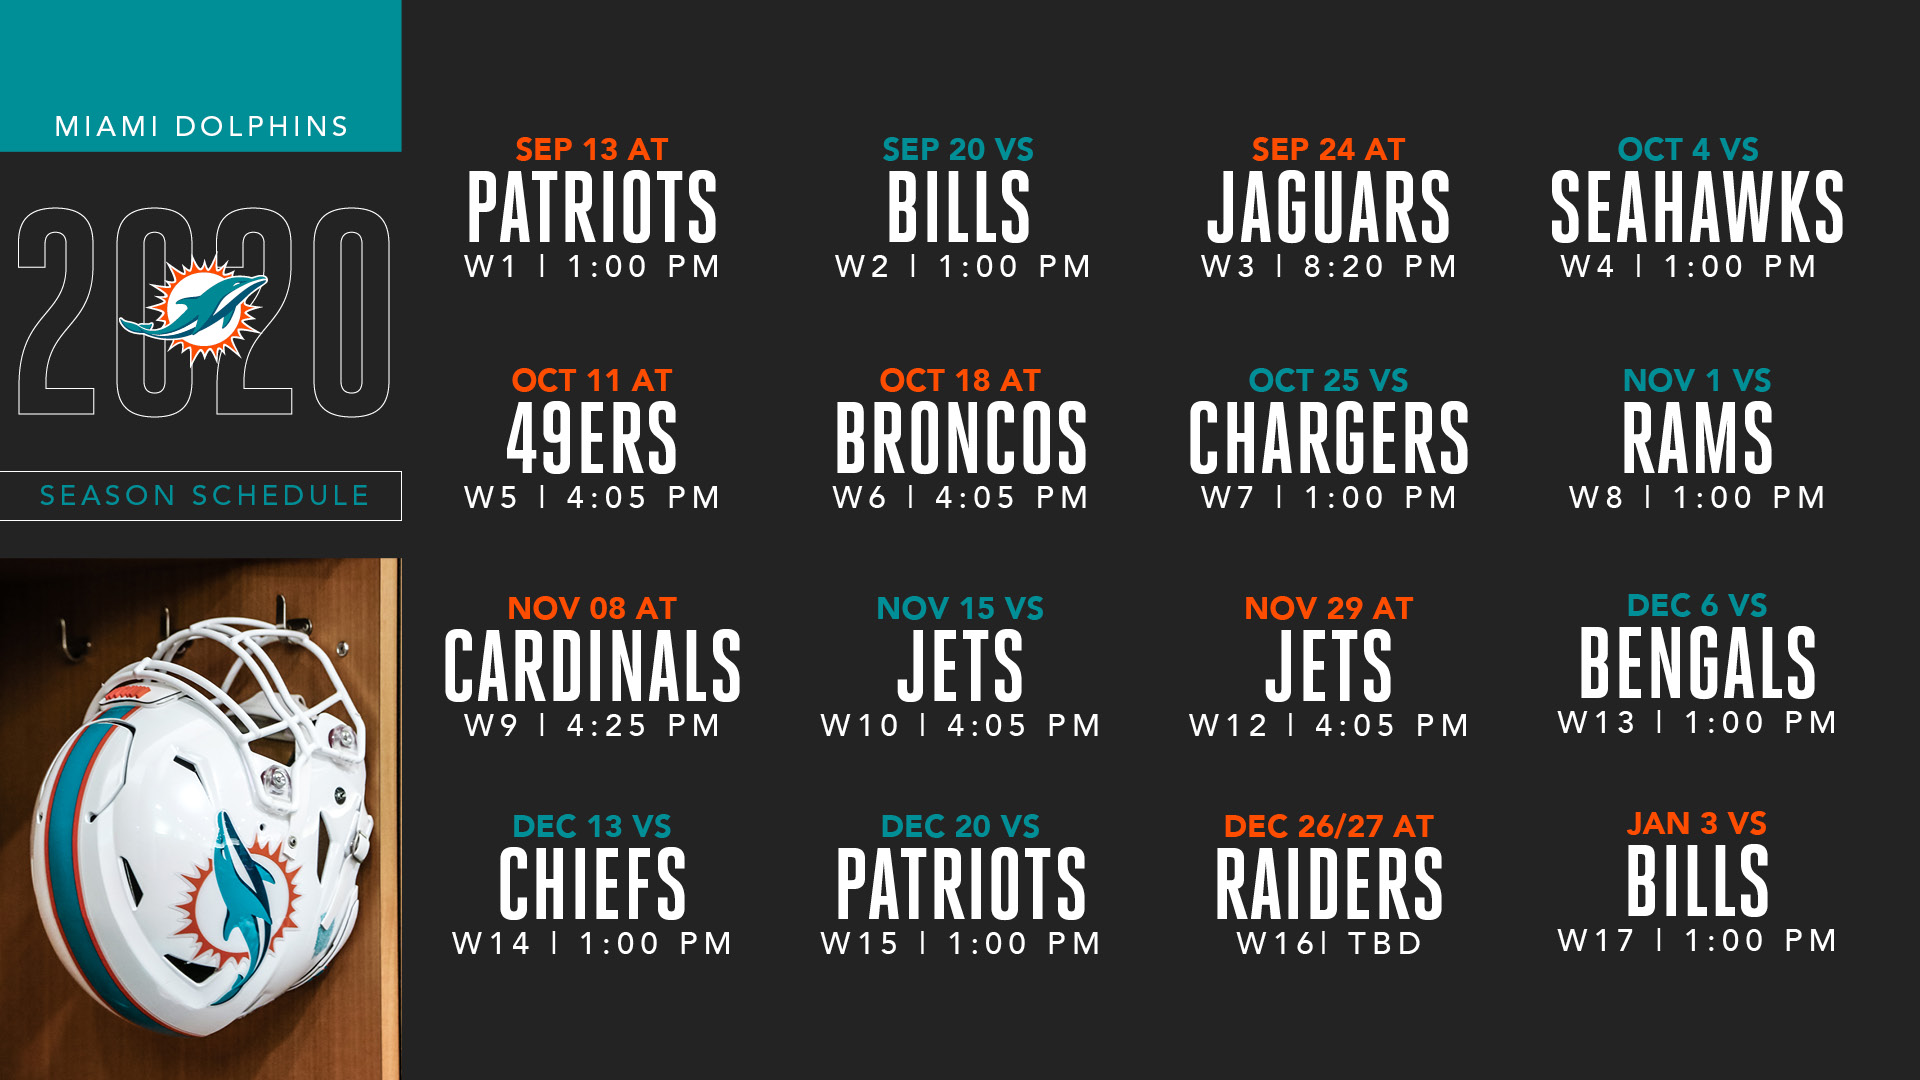 Miami Dolphins 2020 Schedule Wallpaper / NFL Jersey Wallpapers in 2020